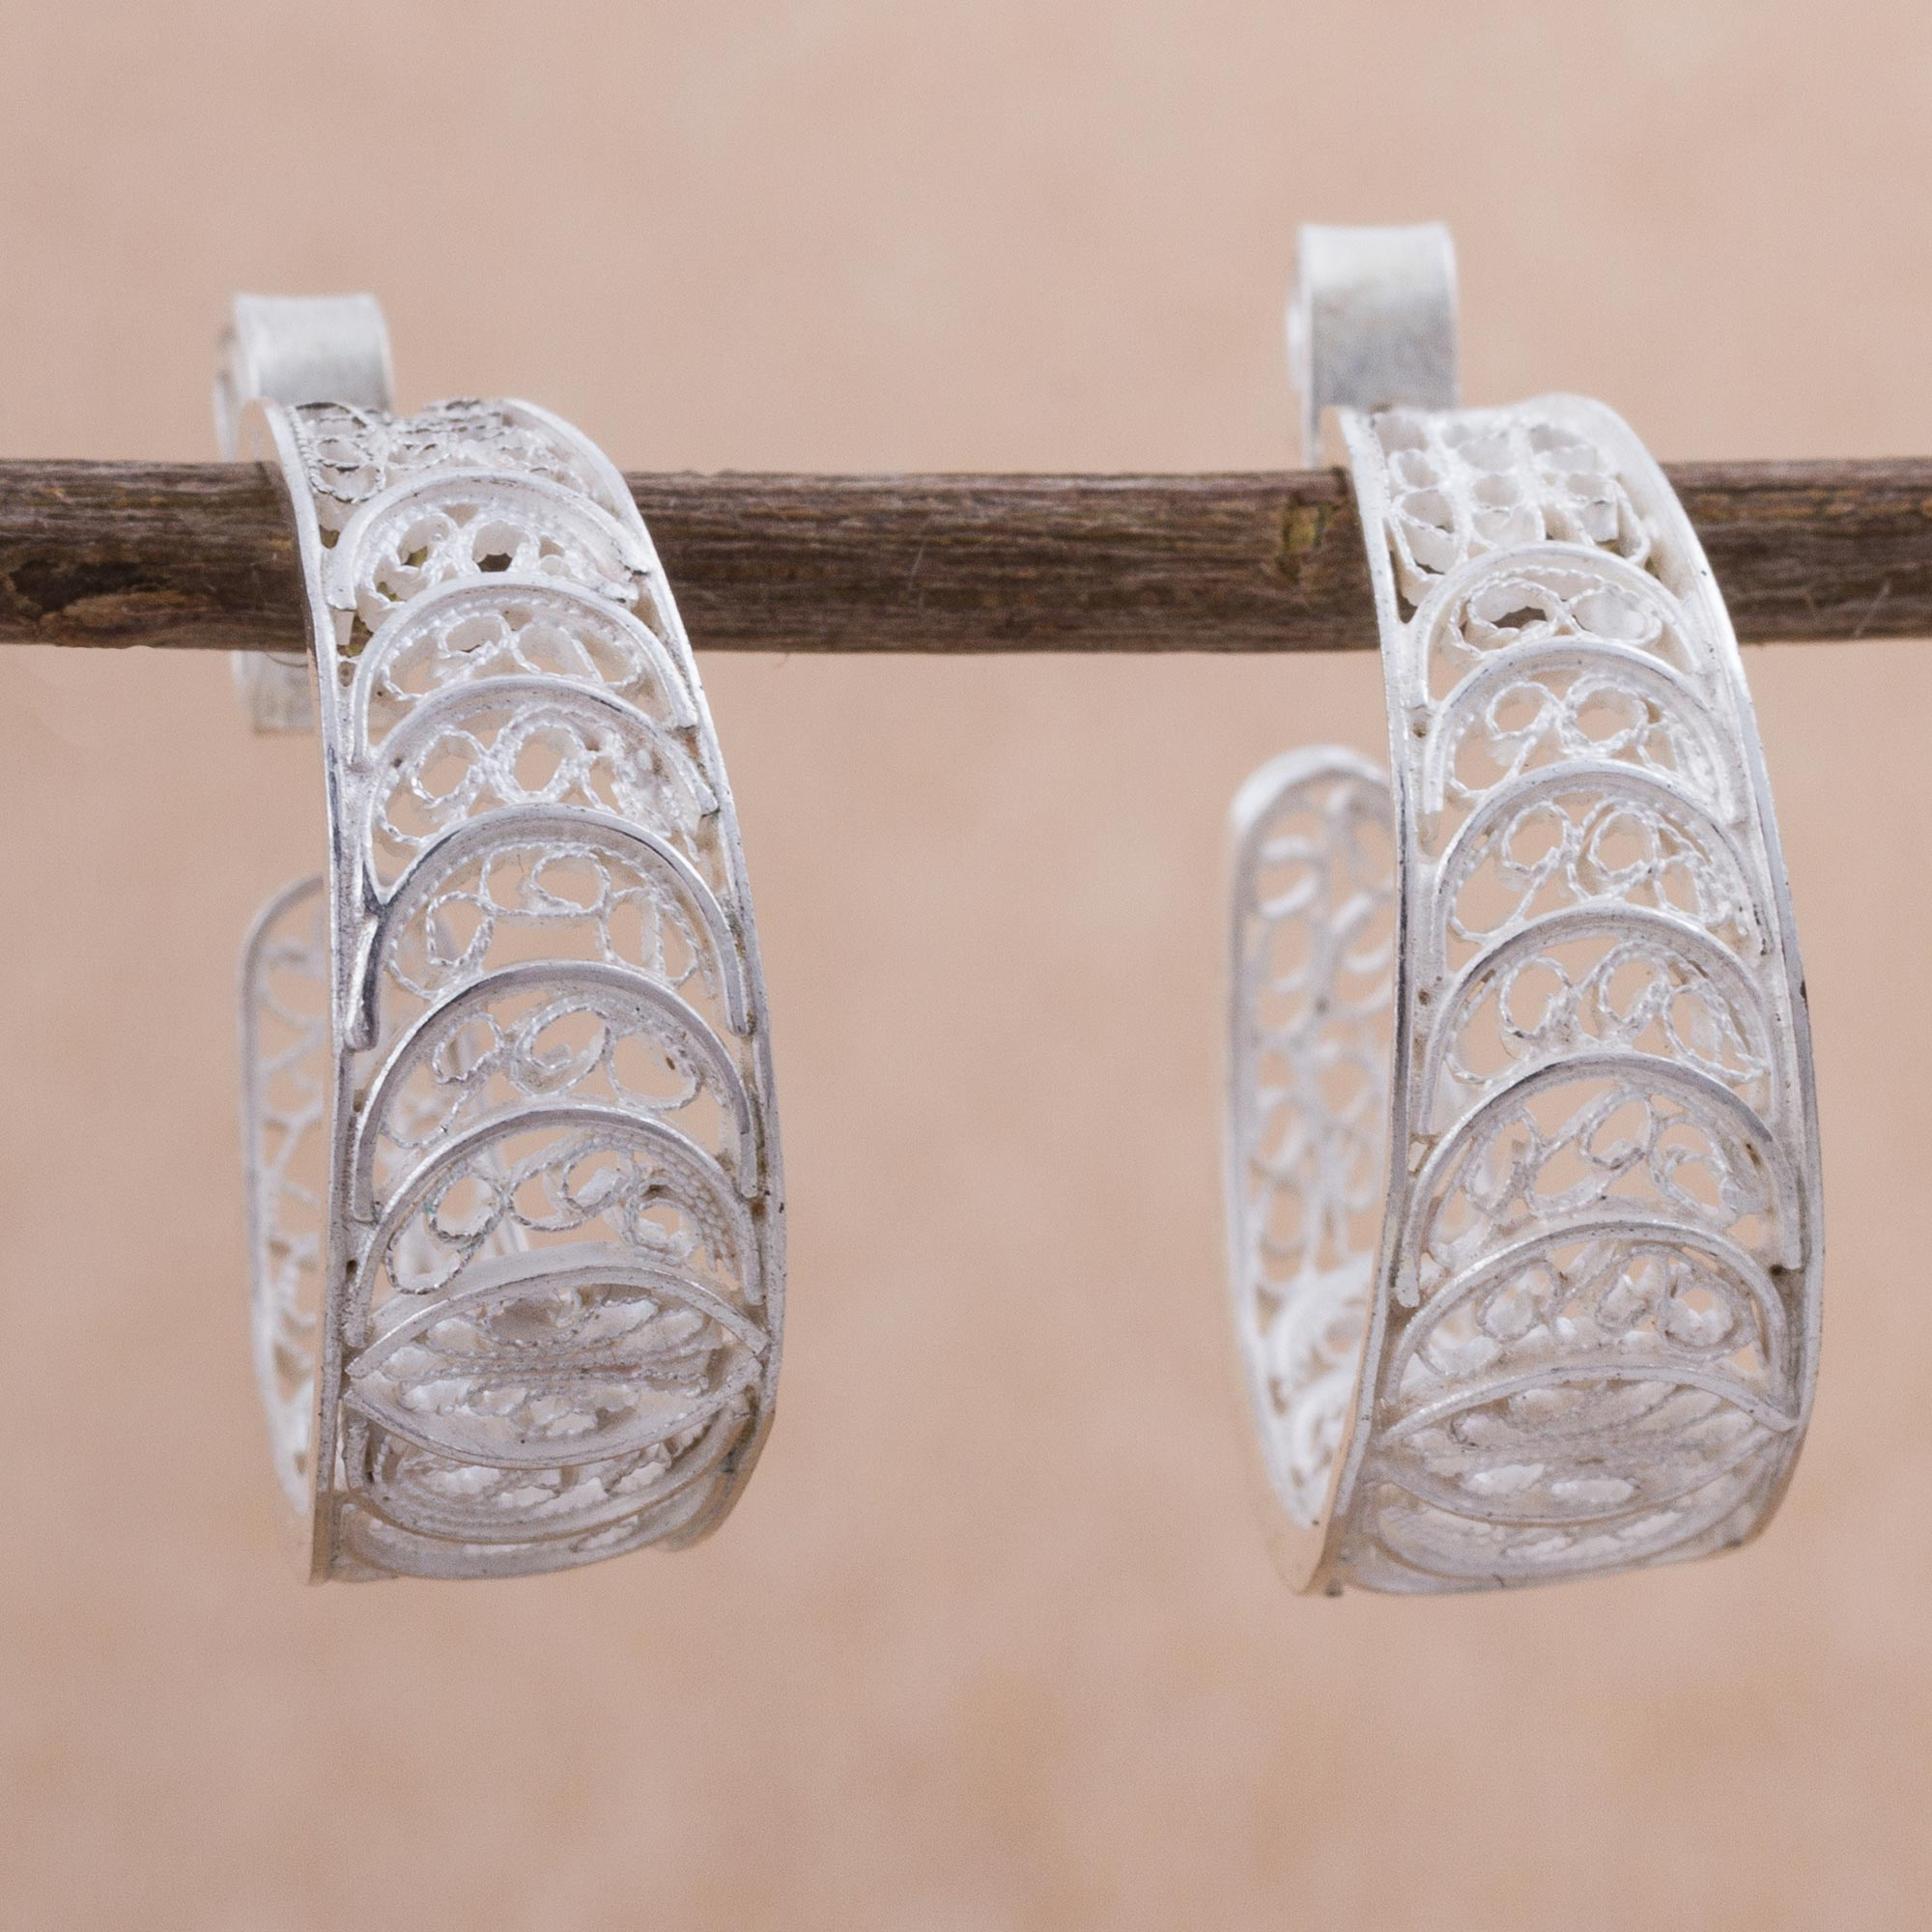 Featuring handcrafted sparkling filigree motifs in silver, the earrings are...